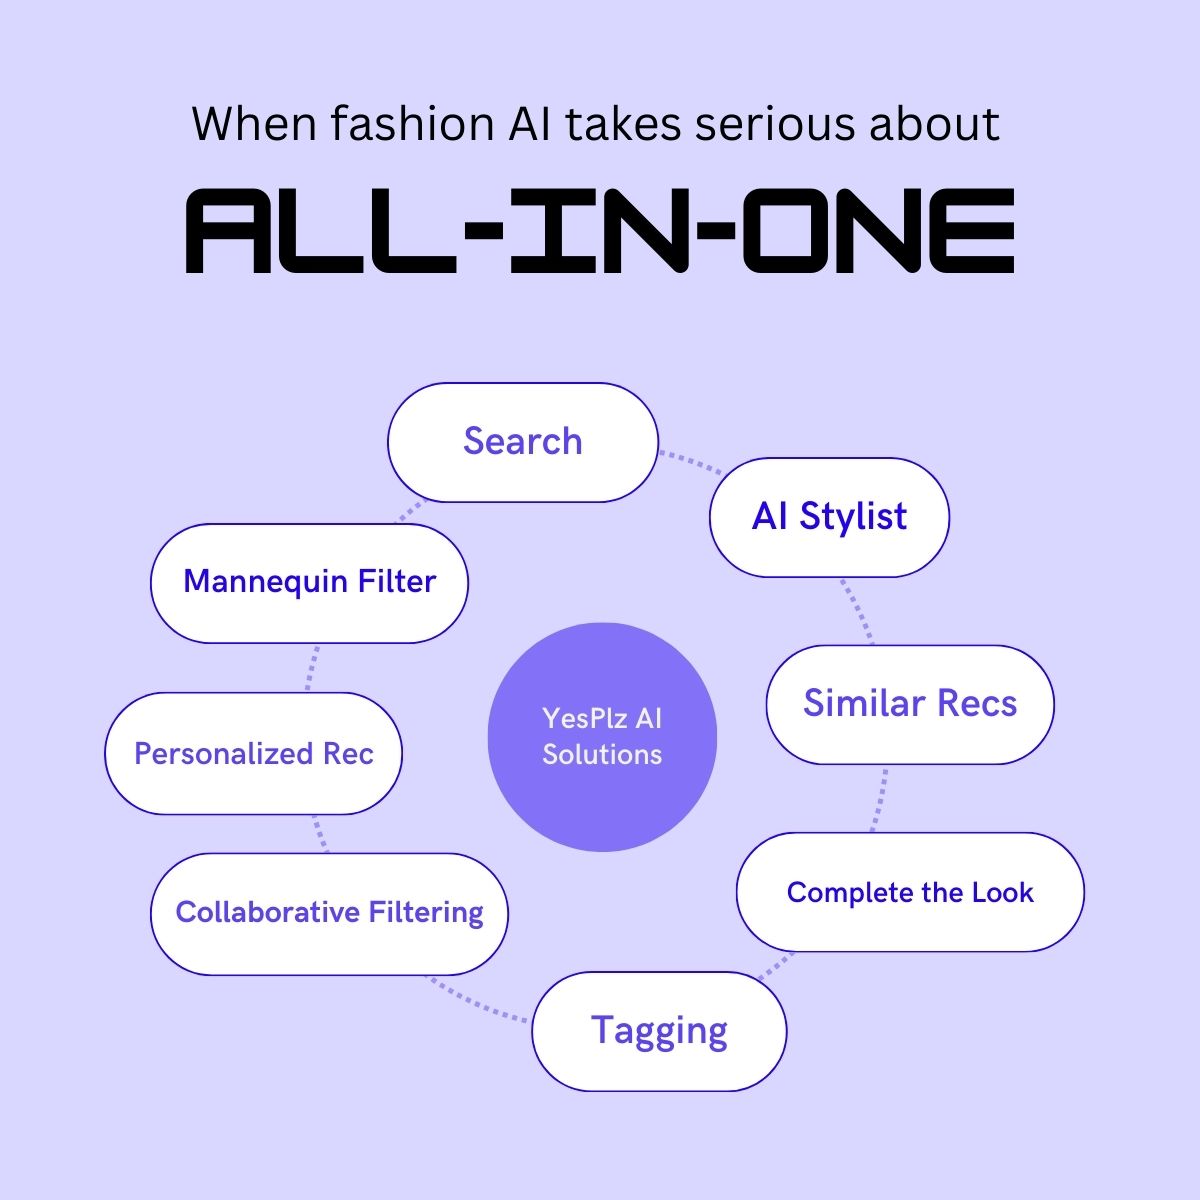 All-in-one fashion AI solutions for brands and retailers